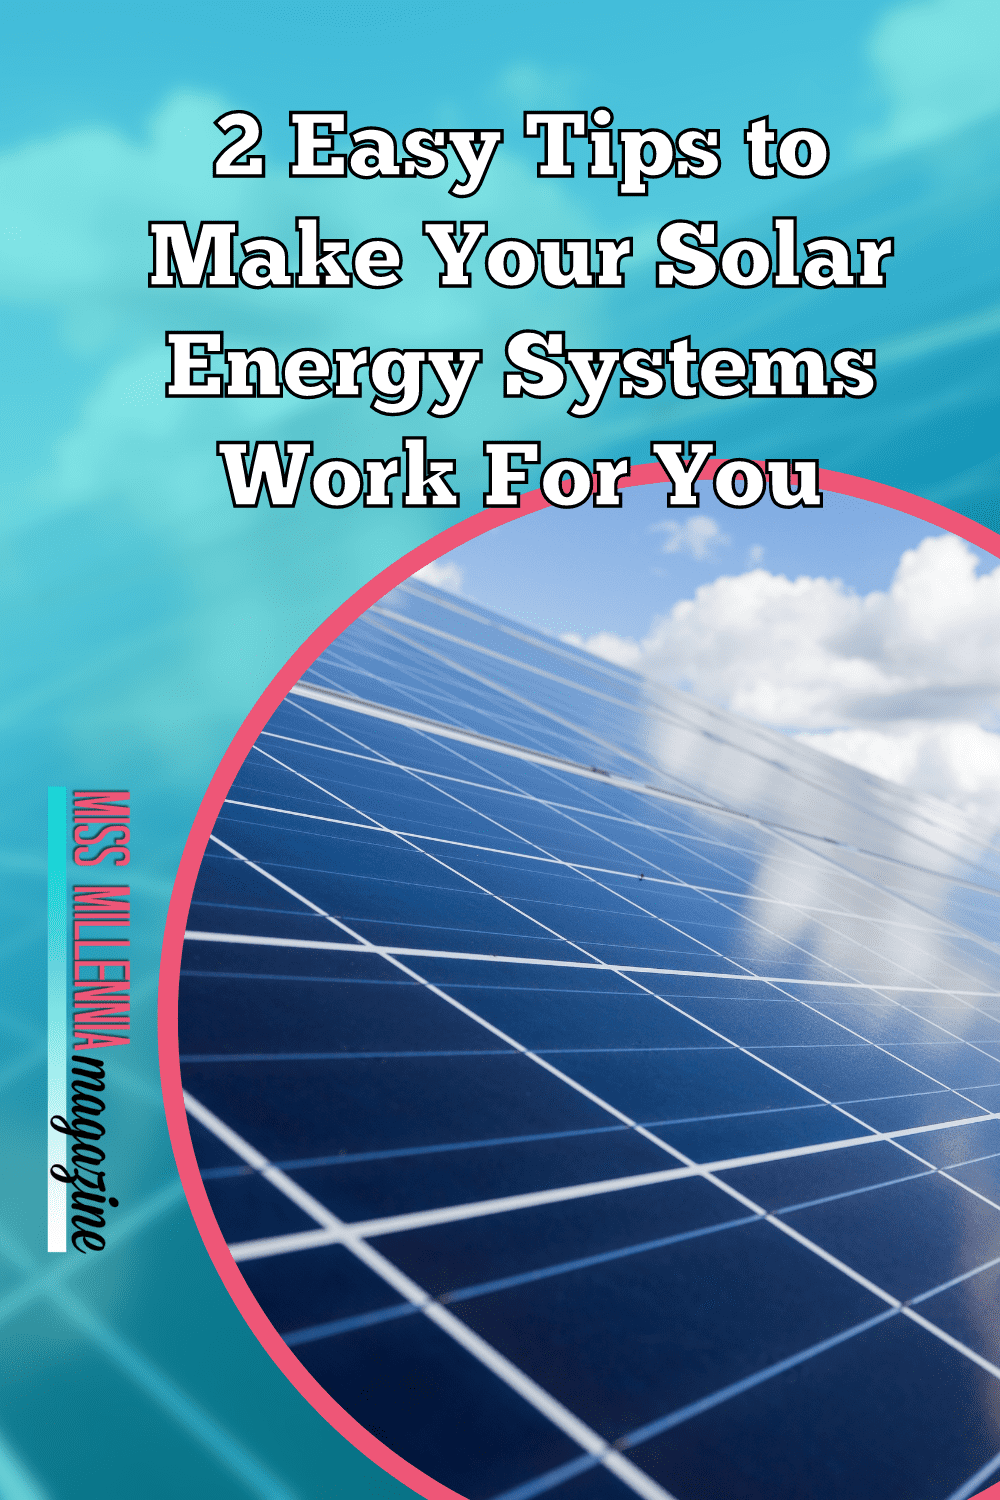 2 Easy Tips to Make Your Solar Energy Systems Work For You